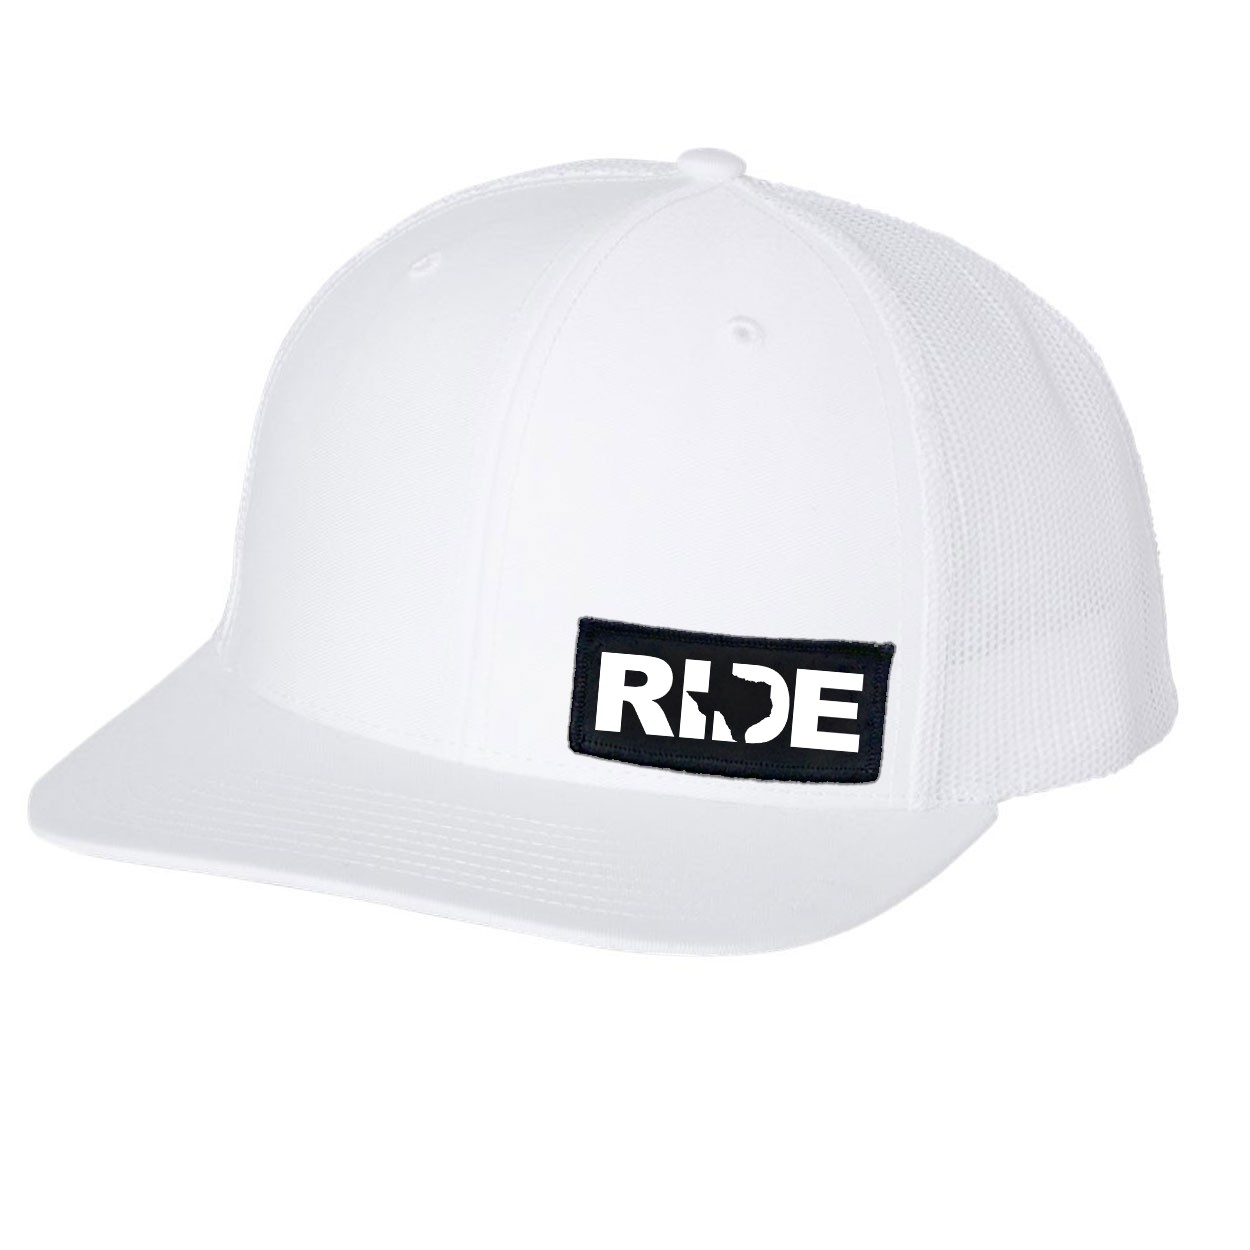 Ride Texas Night Out Woven Patch Snapback Trucker Hat White (White Logo)